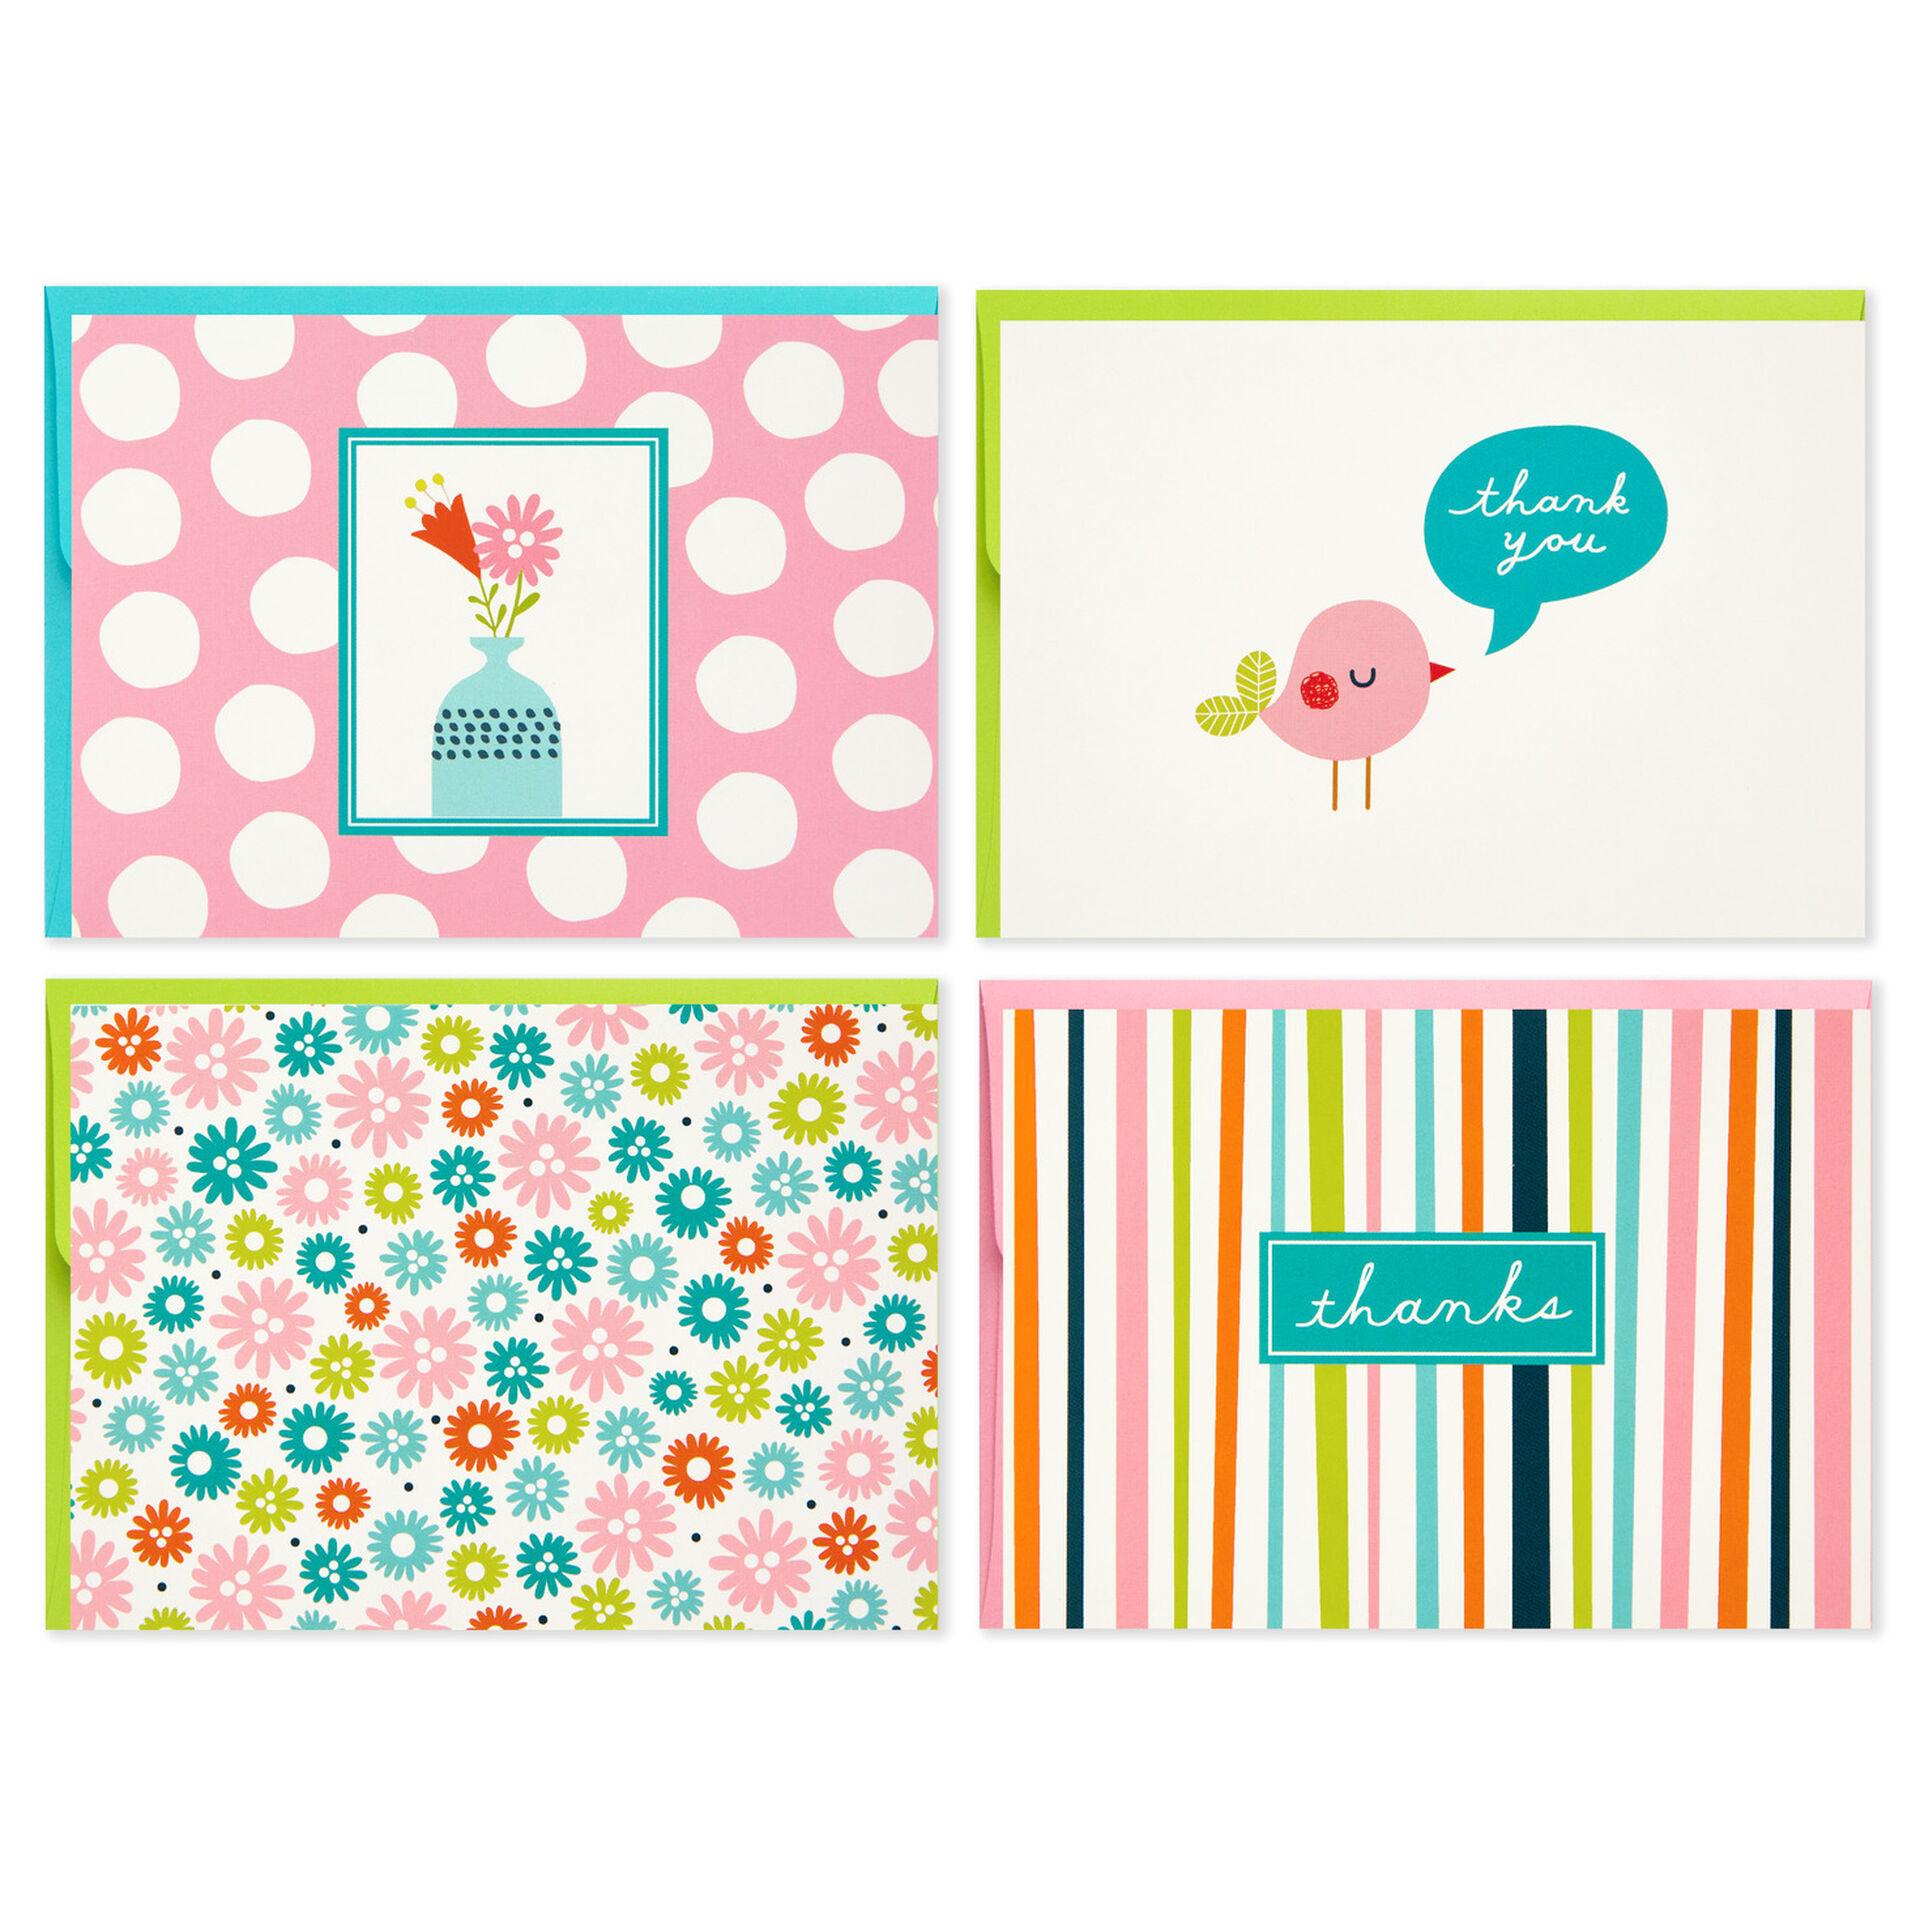 Cheery-ThankYou-and-Blank-Notes-Assortment-Pack_5WDN2065_02